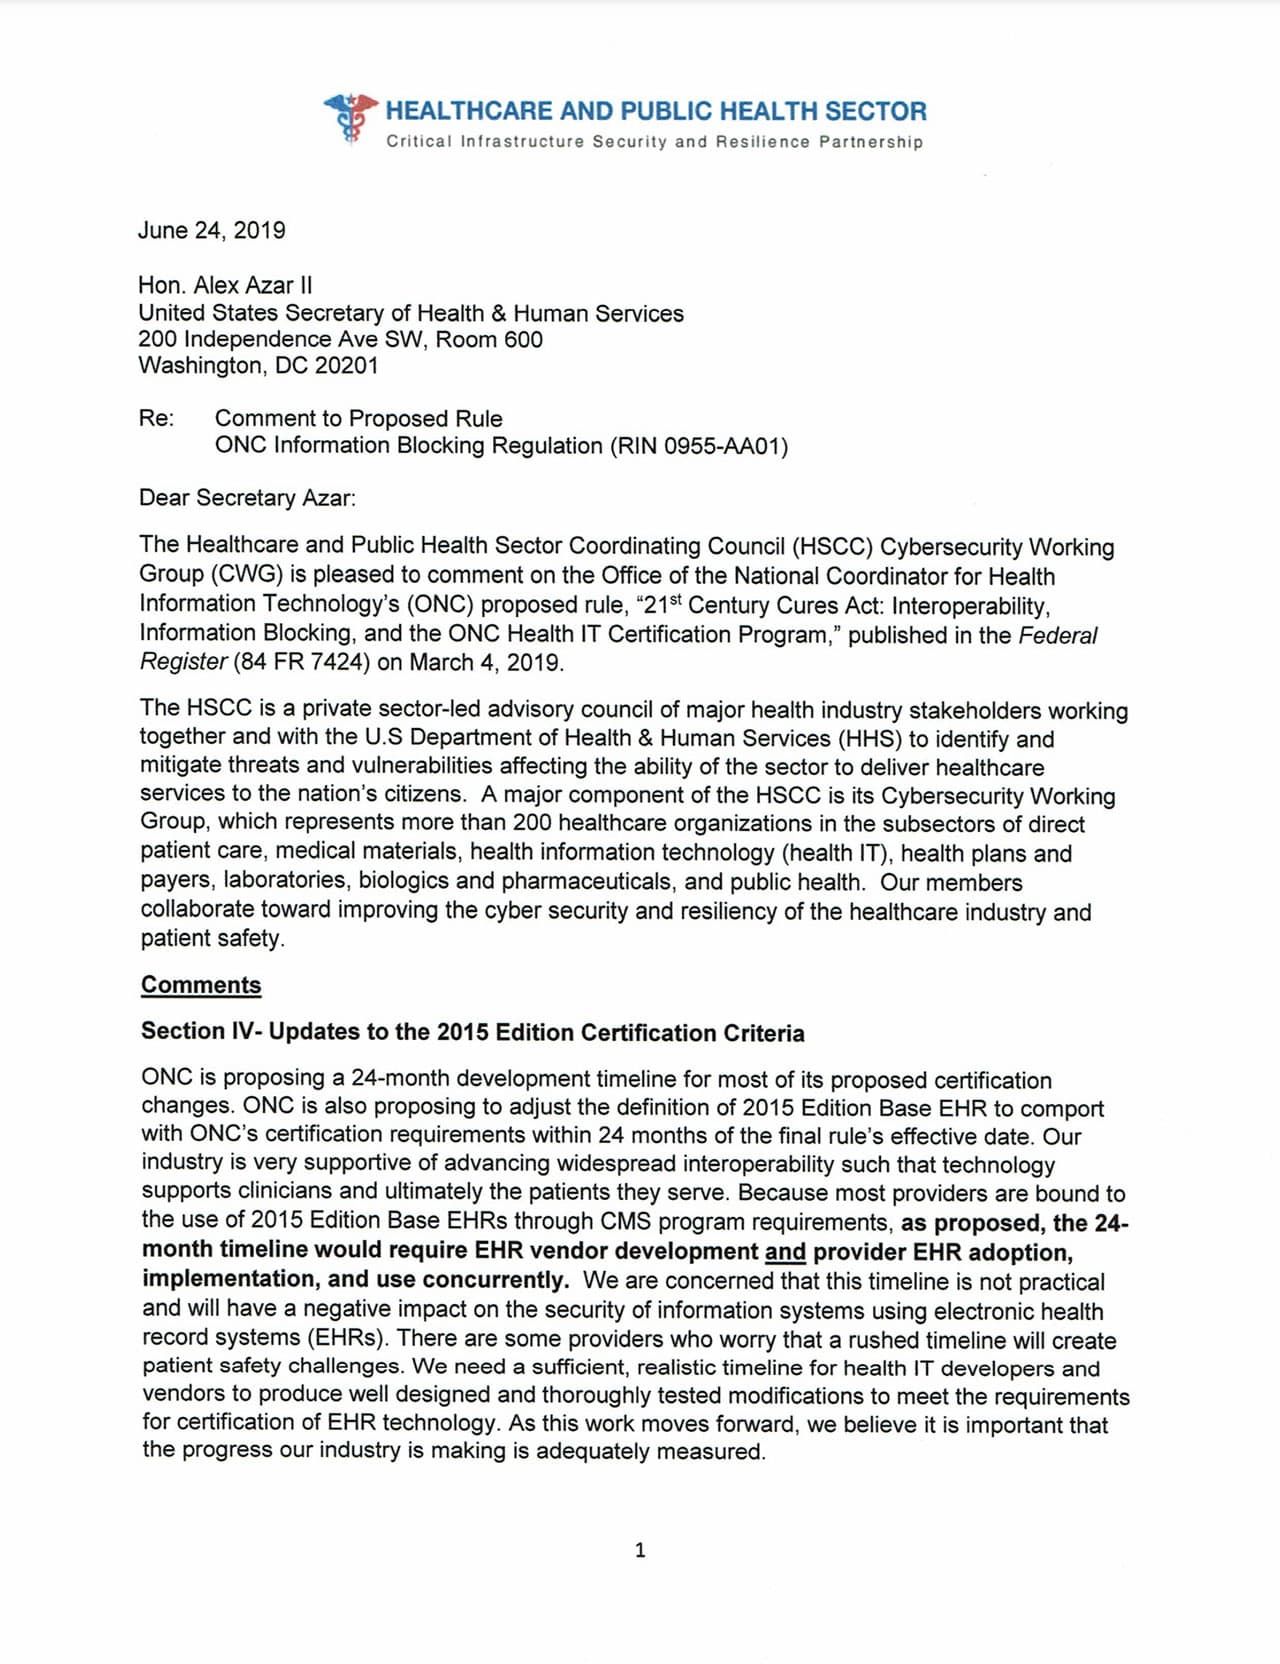 HPH SCC Cybersecurity Working Group Comments on HHS ONC Information Blocking RFI